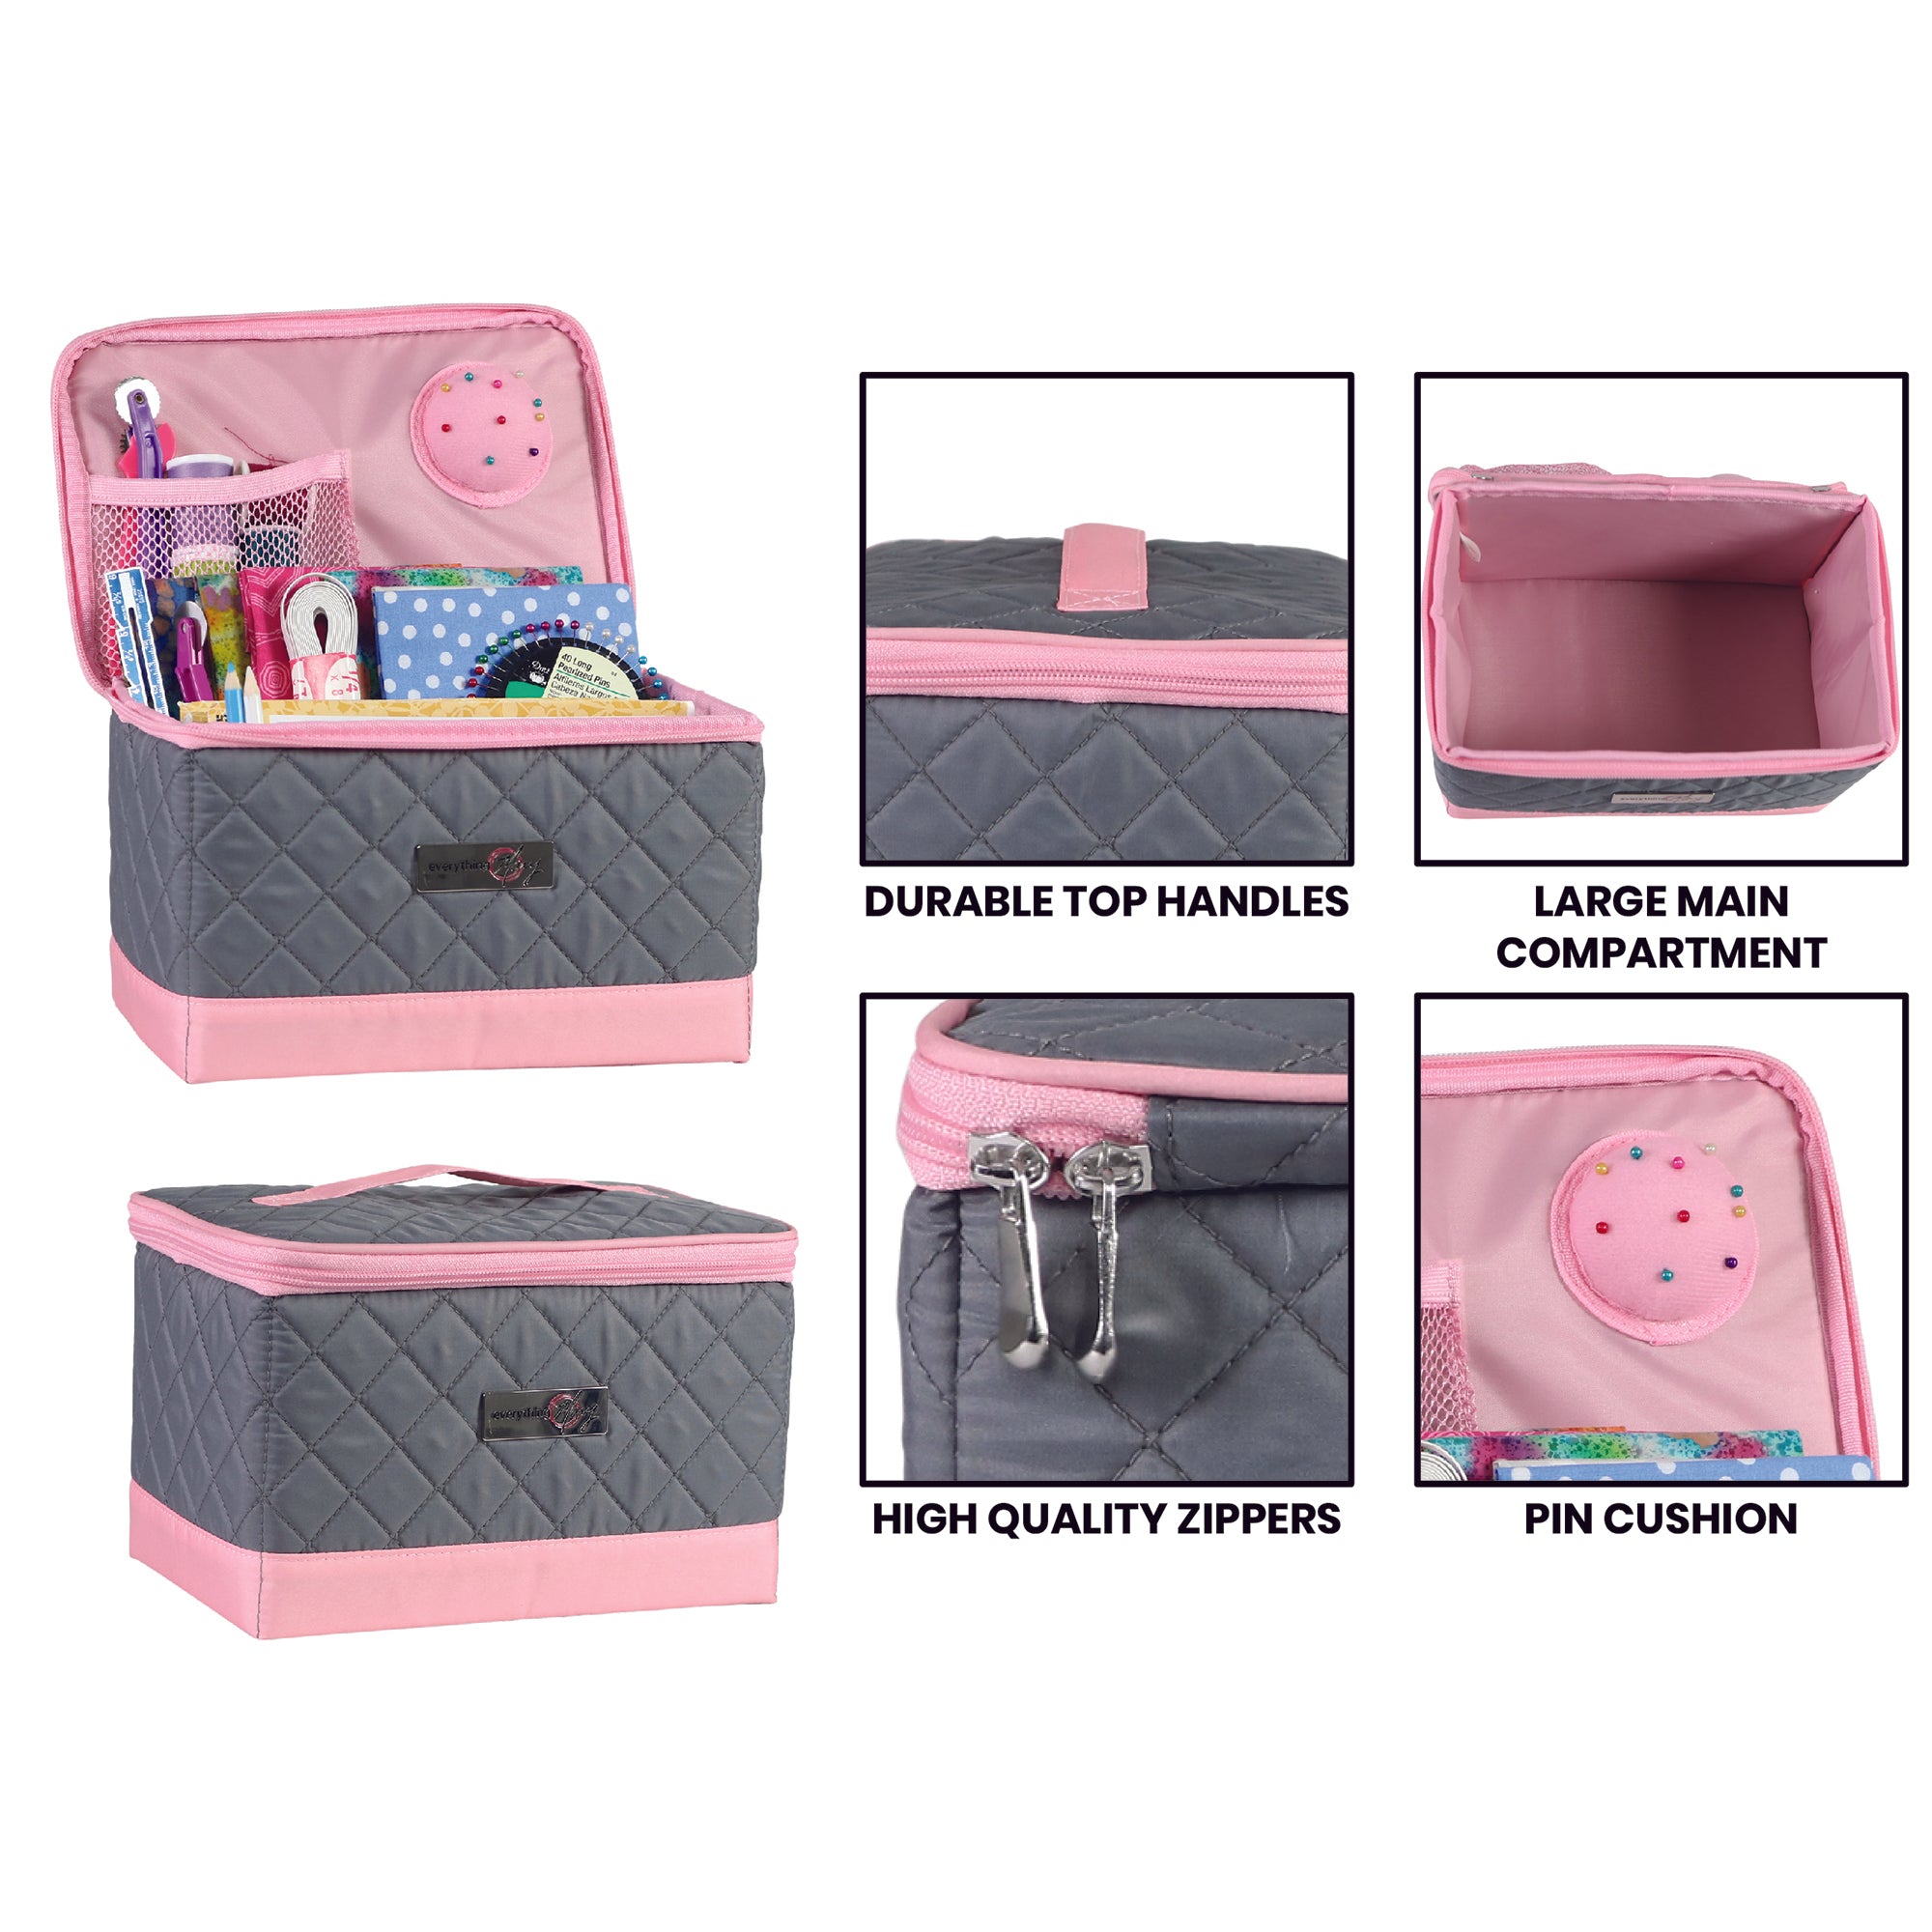 SM SunniMix 2pcs Multipurpose Portable Storage Box Plastic Sewing Box, Tool Box, First Aid Kit and Supplies Organizer Case with Handle and Removable Tray Pink and